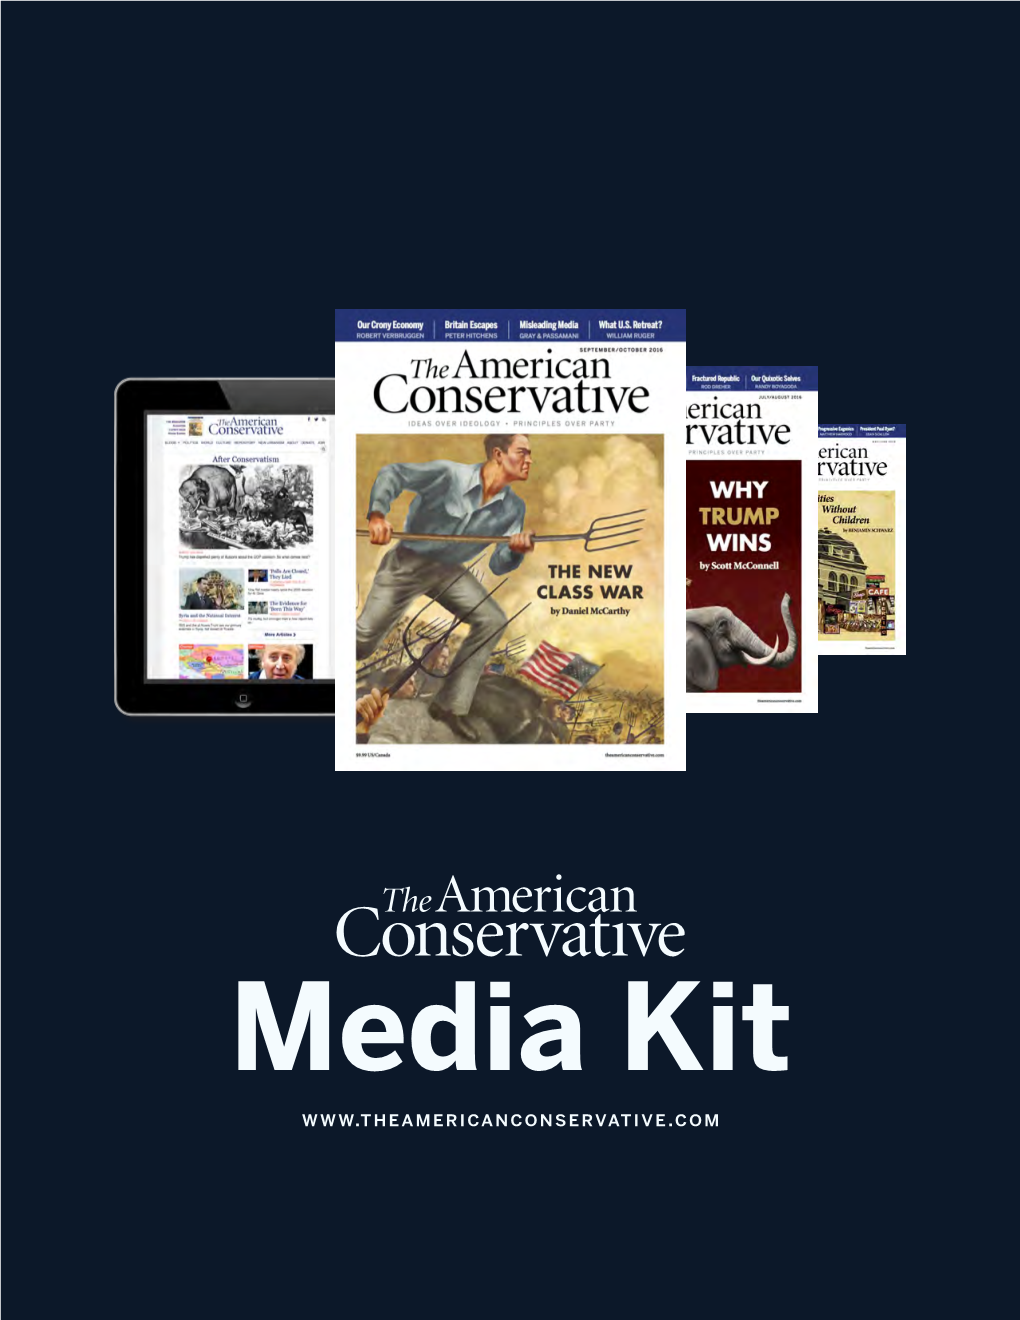 Media Kit “Totally Heterodox and Orthogonal to Our Normal Political Divisions